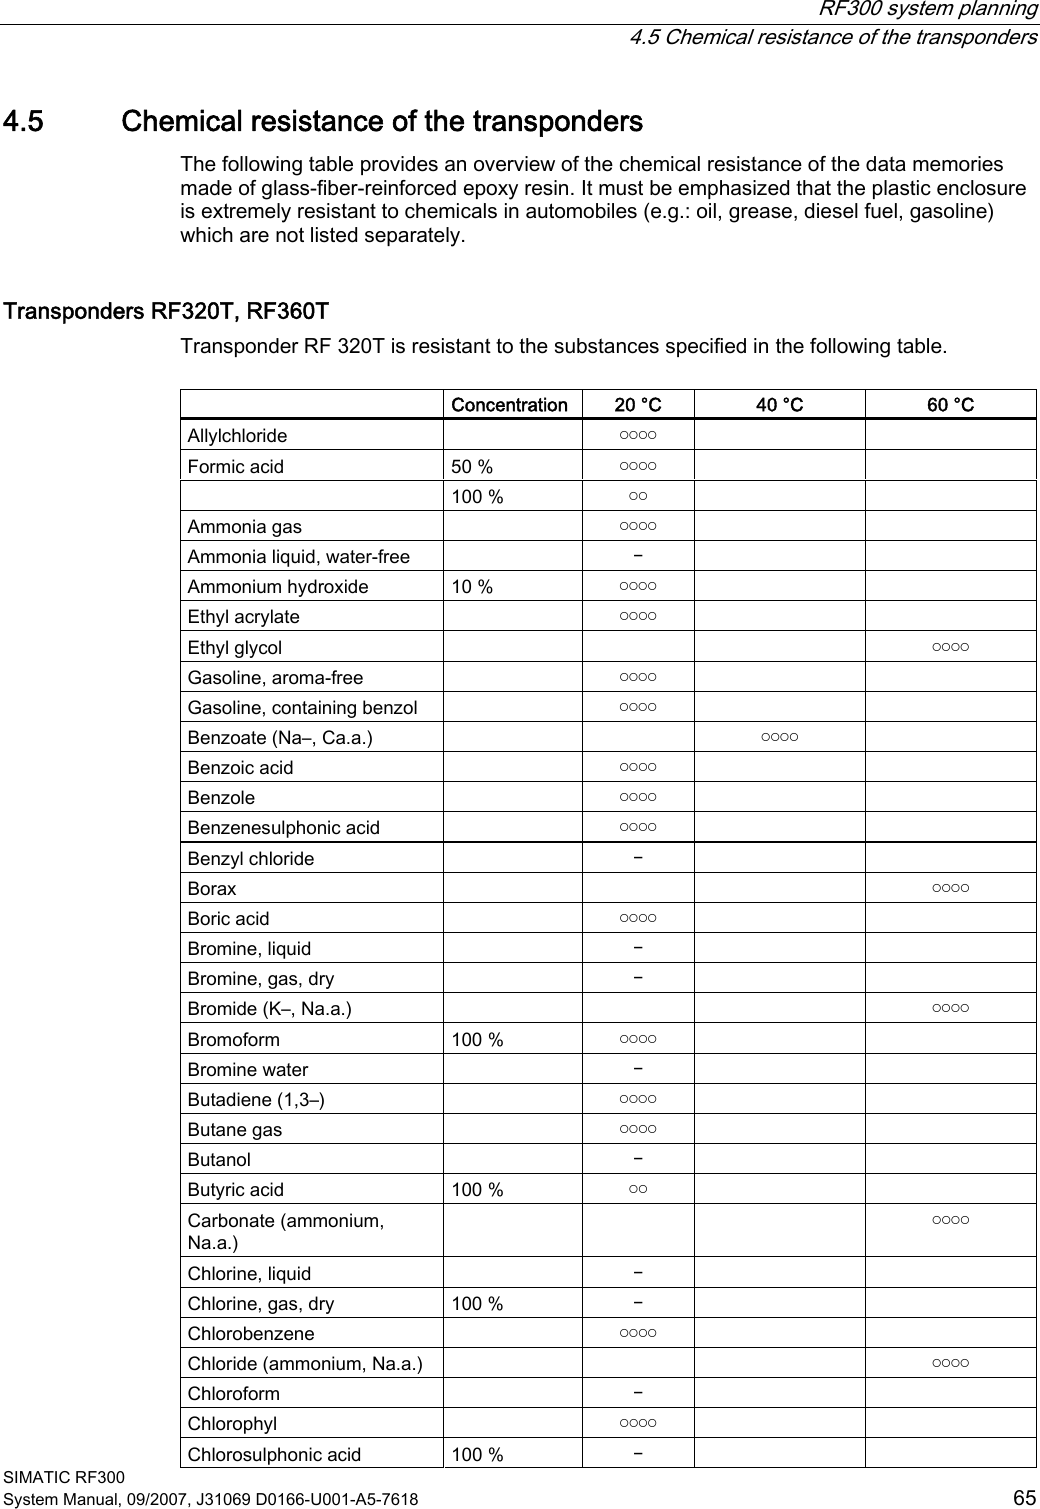  RF300 system planning   4.5 Chemical resistance of the transponders SIMATIC RF300 System Manual, 09/2007, J31069 D0166-U001-A5-7618  65 4.5 Chemical resistance of the transponders The following table provides an overview of the chemical resistance of the data memories made of glass-fiber-reinforced epoxy resin. It must be emphasized that the plastic enclosure is extremely resistant to chemicals in automobiles (e.g.: oil, grease, diesel fuel, gasoline) which are not listed separately.  Transponders RF320T, RF360T Transponder RF 320T is resistant to the substances specified in the following table.    Concentration  20 °C  40 °C  60 °C Allylchloride    ￮￮￮￮     Formic acid  50 %  ￮￮￮￮       100 %  ￮￮     Ammonia gas    ￮￮￮￮     Ammonia liquid, water-free    ￚ     Ammonium hydroxide  10 %  ￮￮￮￮     Ethyl acrylate    ￮￮￮￮     Ethyl glycol        ￮￮￮￮ Gasoline, aroma-free    ￮￮￮￮     Gasoline, containing benzol    ￮￮￮￮     Benzoate (Na–, Ca.a.)      ￮￮￮￮   Benzoic acid    ￮￮￮￮     Benzole    ￮￮￮￮     Benzenesulphonic acid    ￮￮￮￮     Benzyl chloride    ￚ     Borax        ￮￮￮￮ Boric acid    ￮￮￮￮     Bromine, liquid    ￚ     Bromine, gas, dry    ￚ     Bromide (K–, Na.a.)        ￮￮￮￮ Bromoform  100 %  ￮￮￮￮     Bromine water    ￚ     Butadiene (1,3–)    ￮￮￮￮     Butane gas    ￮￮￮￮     Butanol    ￚ     Butyric acid  100 %  ￮￮     Carbonate (ammonium, Na.a.)       ￮￮￮￮ Chlorine, liquid    ￚ     Chlorine, gas, dry  100 %  ￚ     Chlorobenzene    ￮￮￮￮     Chloride (ammonium, Na.a.)        ￮￮￮￮ Chloroform    ￚ     Chlorophyl    ￮￮￮￮     Chlorosulphonic acid  100 %  ￚ     